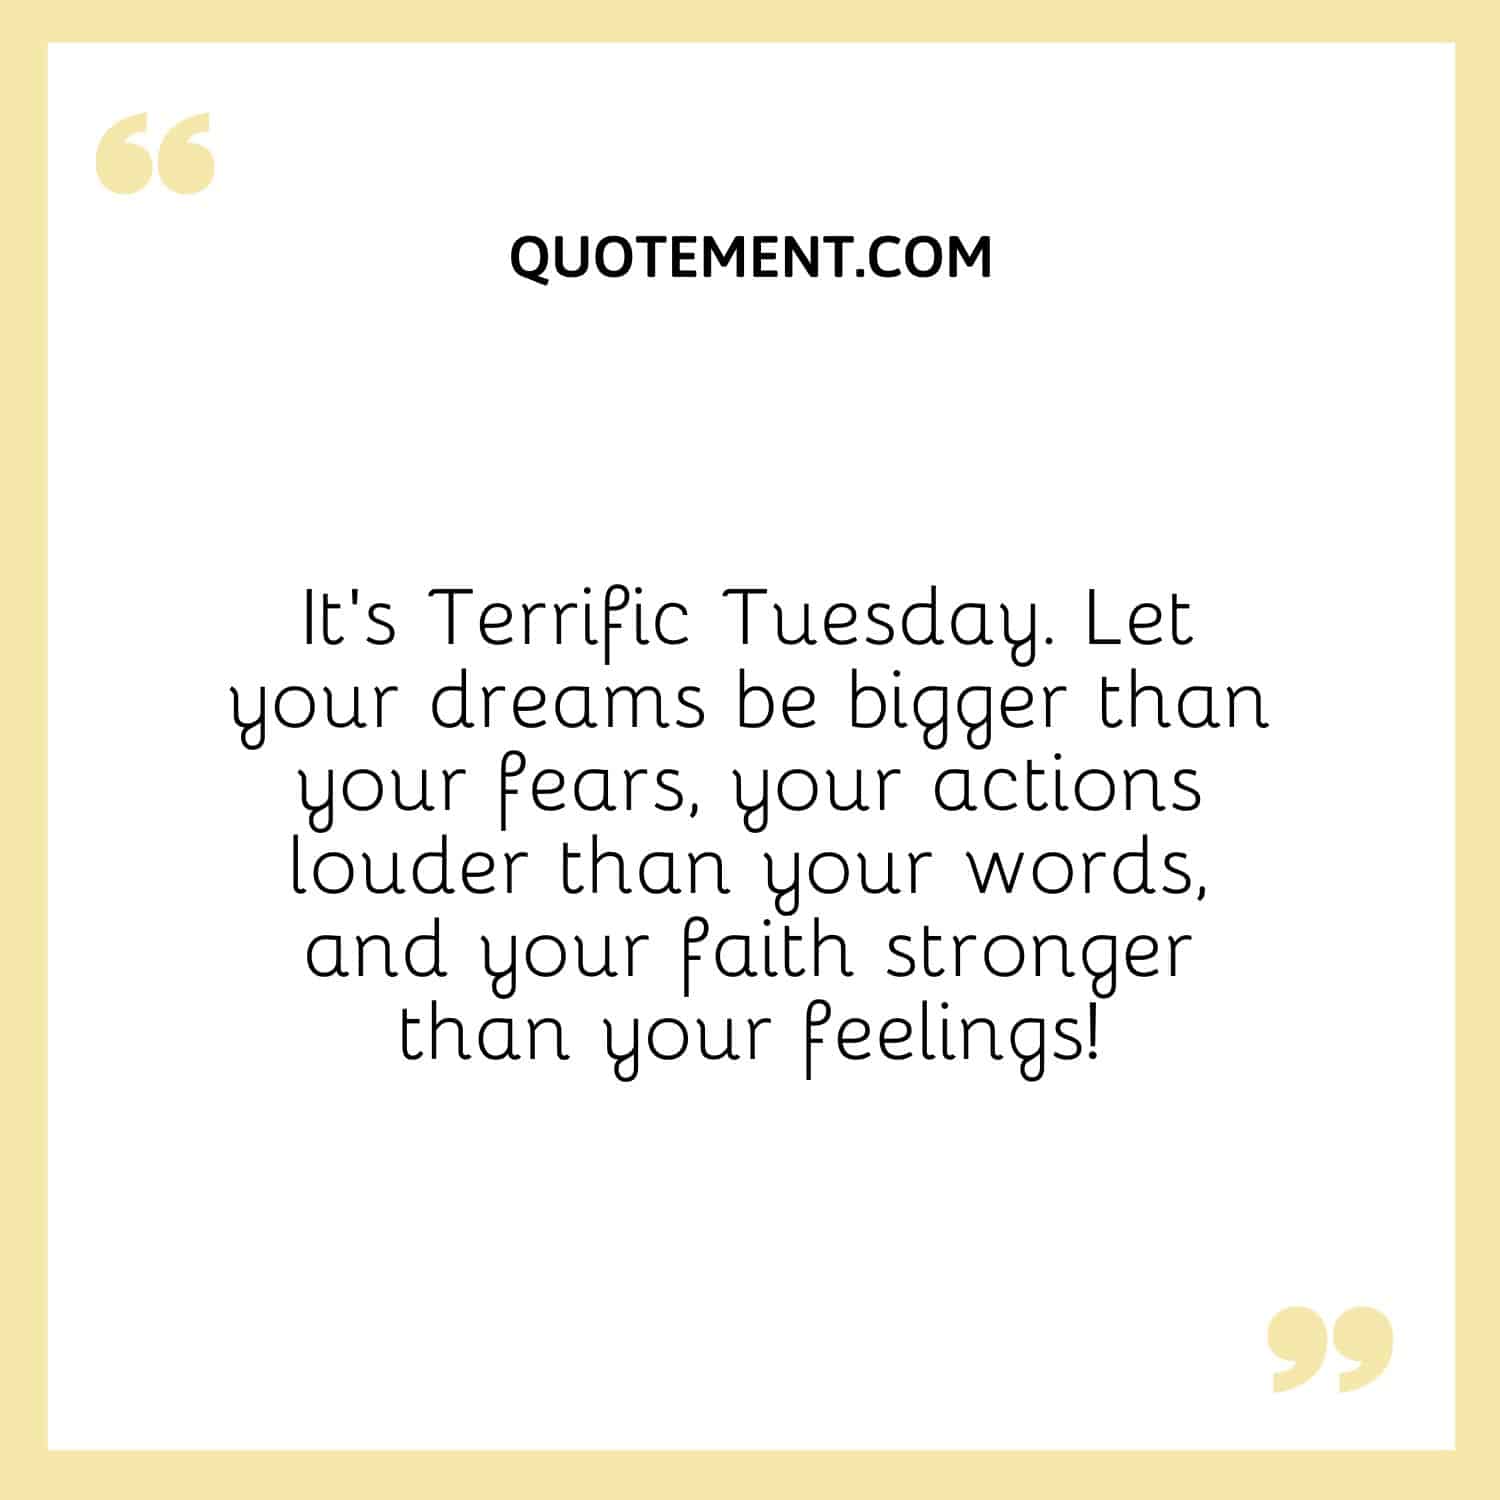 It’s Terrific Tuesday. Let your dreams be bigger than your fears, your actions louder than your words, and your faith stronger than your feelings!